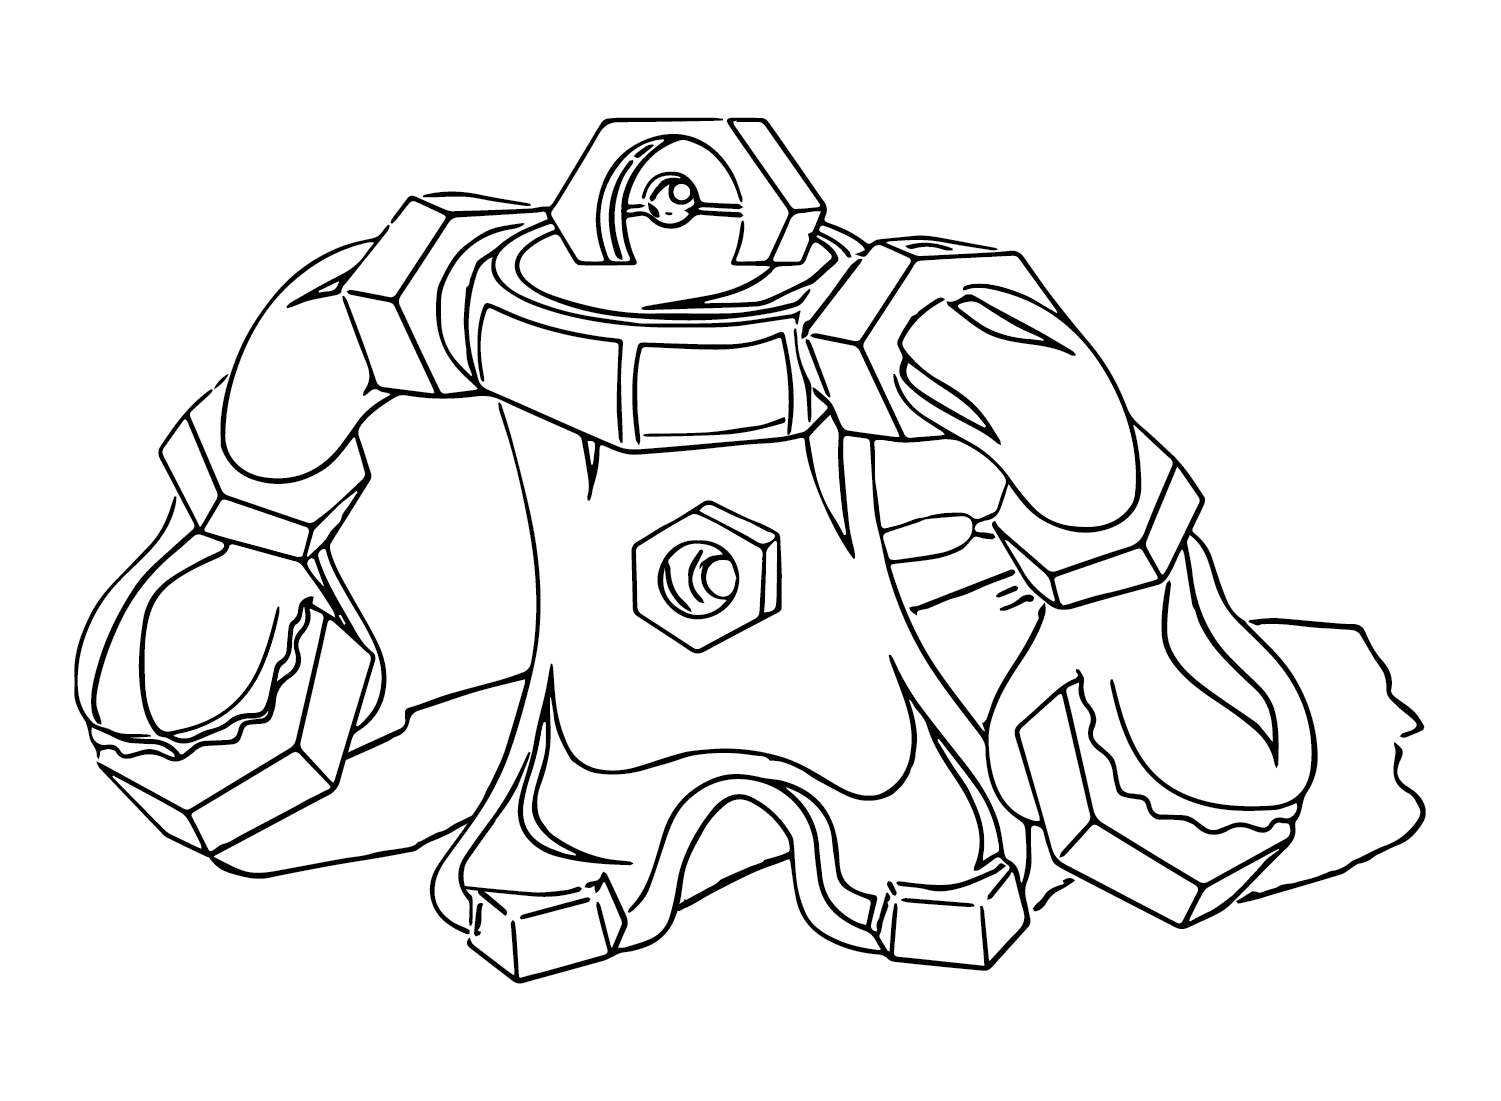 Melmetal Drawing Coloring Page